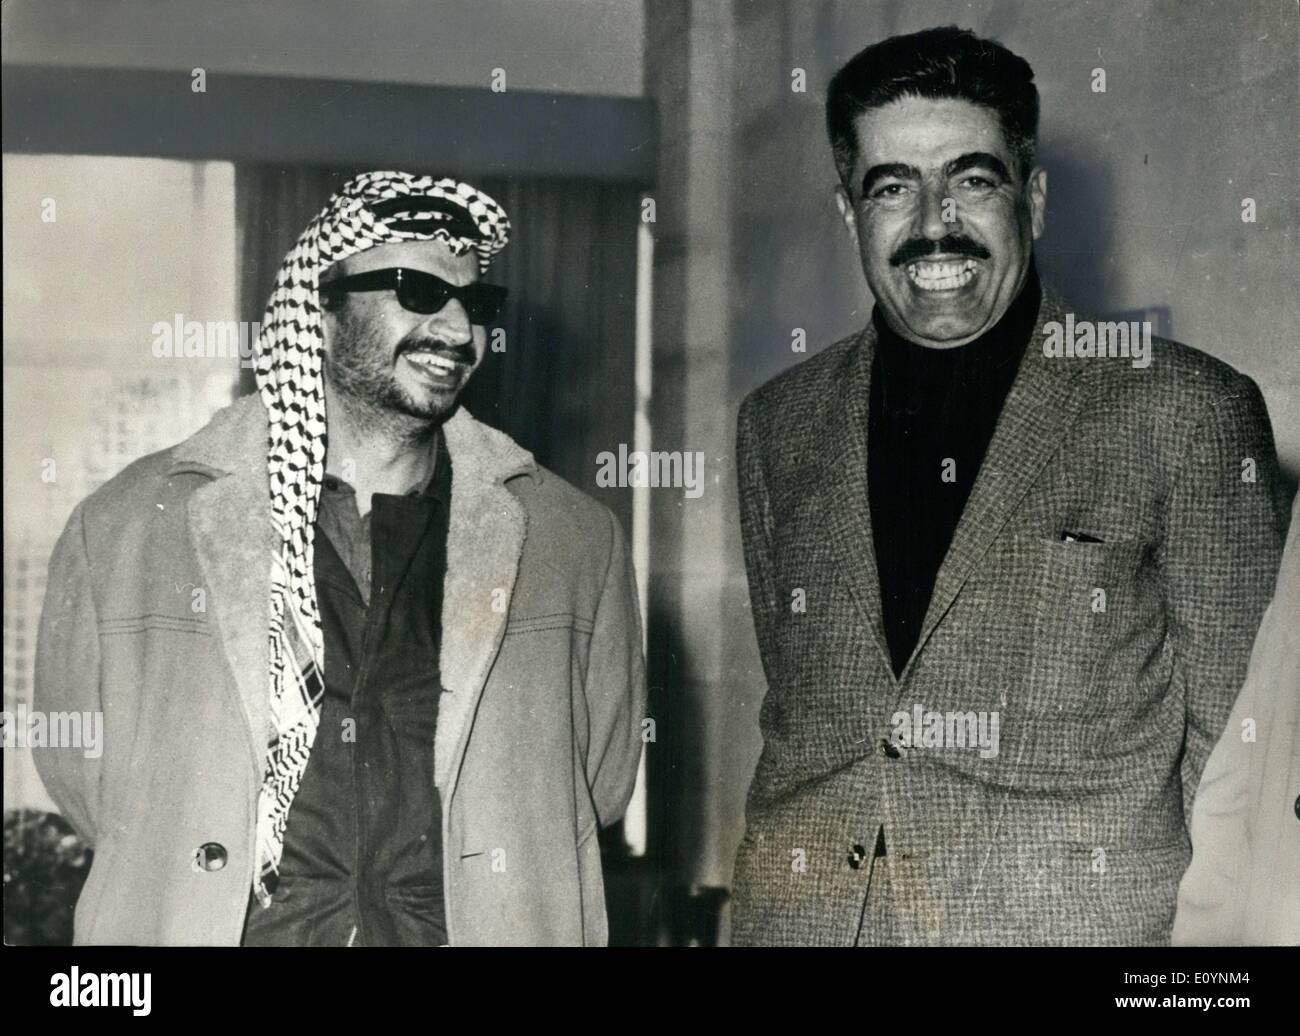 Dec. 12, 1970 - Jordan's Premier And Yaser Arafat: After the meeting in Amman, at which agreement was reached on ending the latest clashes between the Jordan Army and Palestinian guerrillas, there was a luncheon party at the Royal Court, given in honour of Mr. Bahi Ladgham, the Tunisian head of the Arab peace commission. Photo shows: The Jordanian Premier, Wasfi Tell, on right, pictured with Mr. Yaser Arafat, chairman of the central committee for the Palestine Liberation organisation. Stock Photo